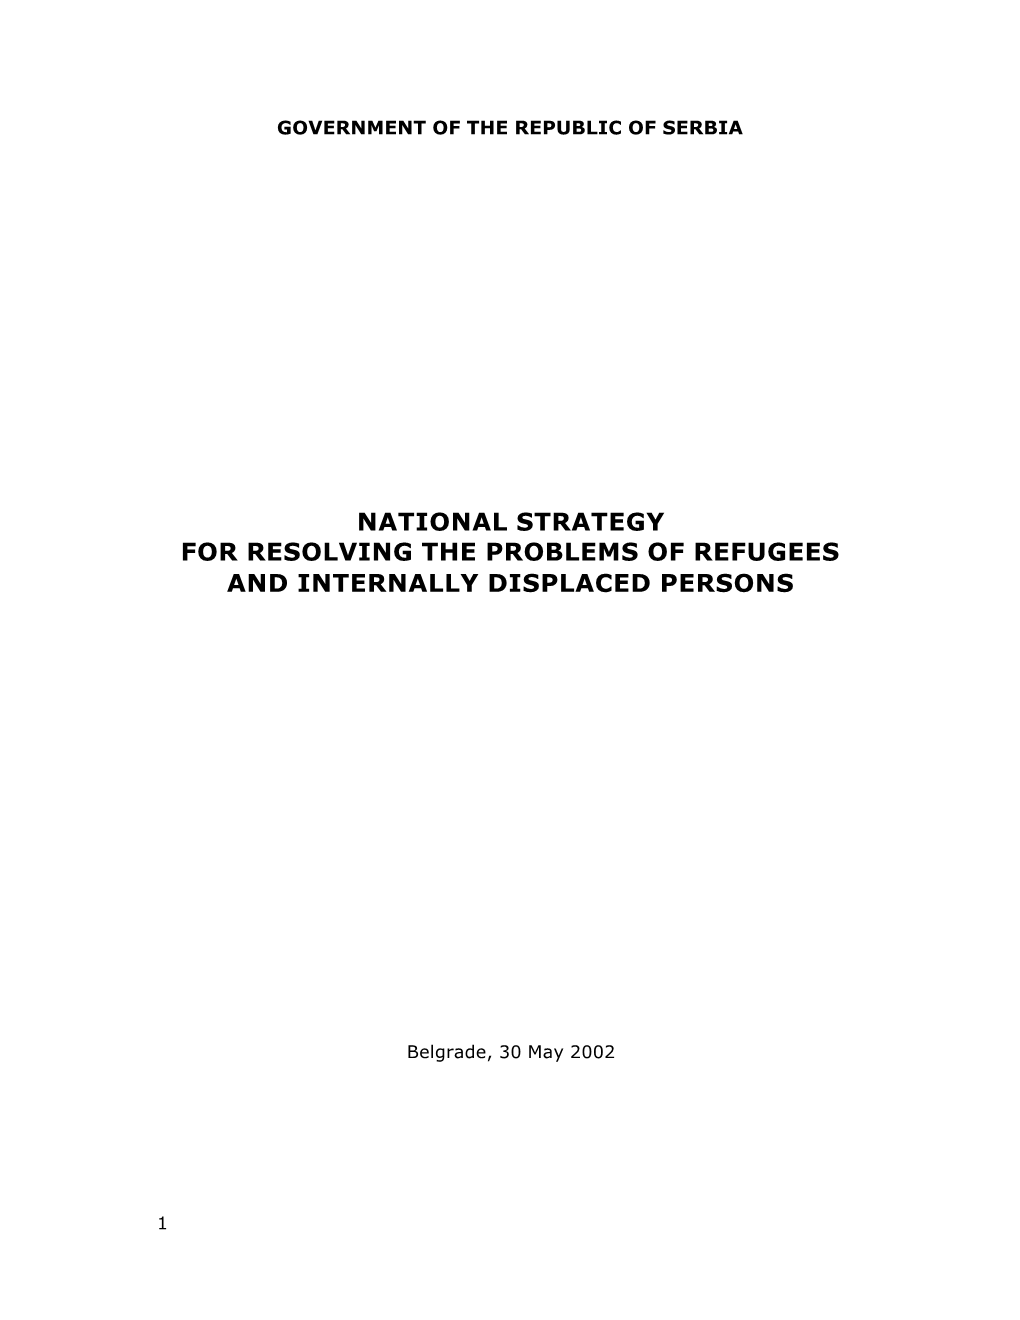 National Strategy for Resolving the Problems of Refugees and Internally Displaced Persons